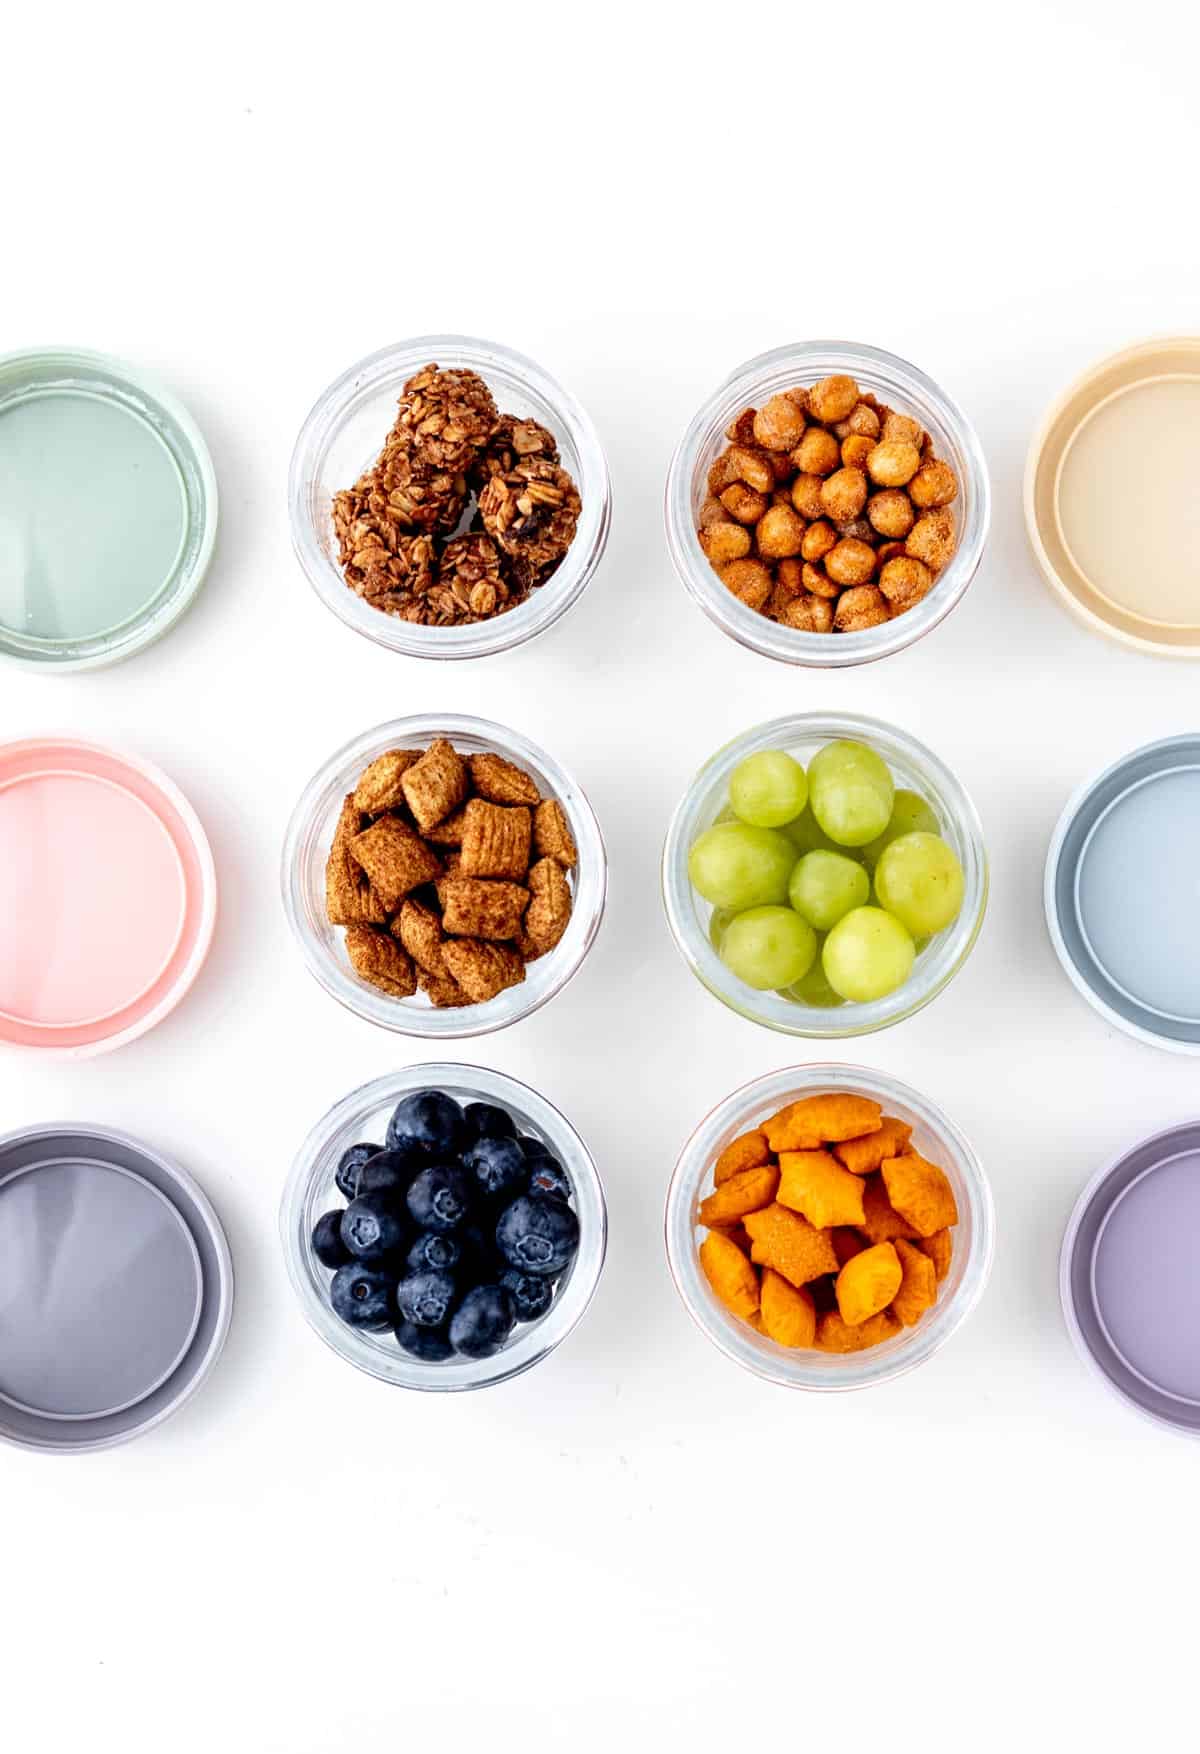 Overhead shot of easy road trip snacks packed in little containers with lids.